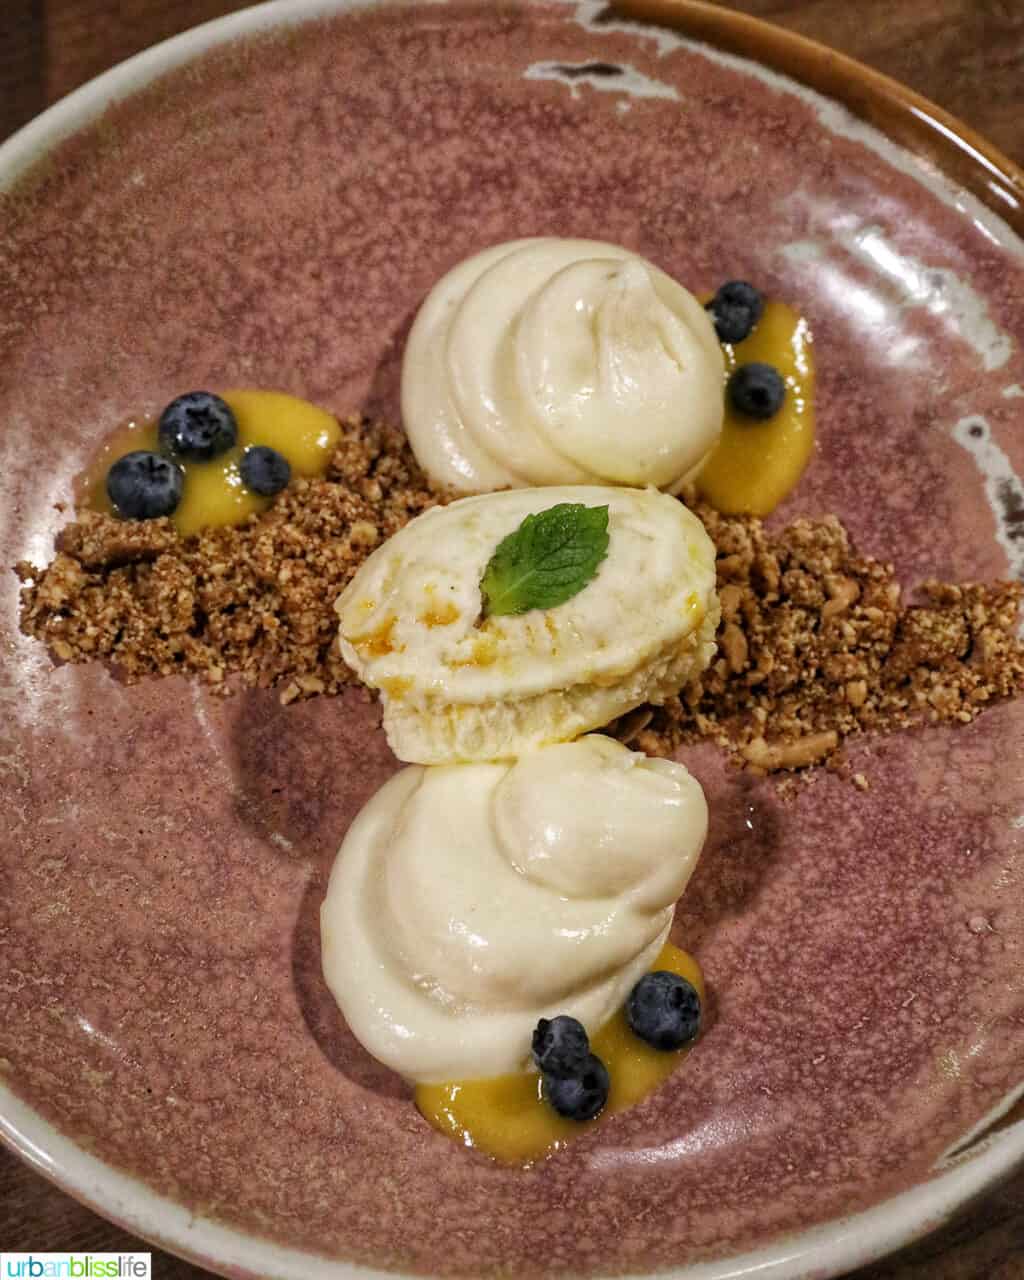 deconstructed cheesecake on a beige plate with blerries.